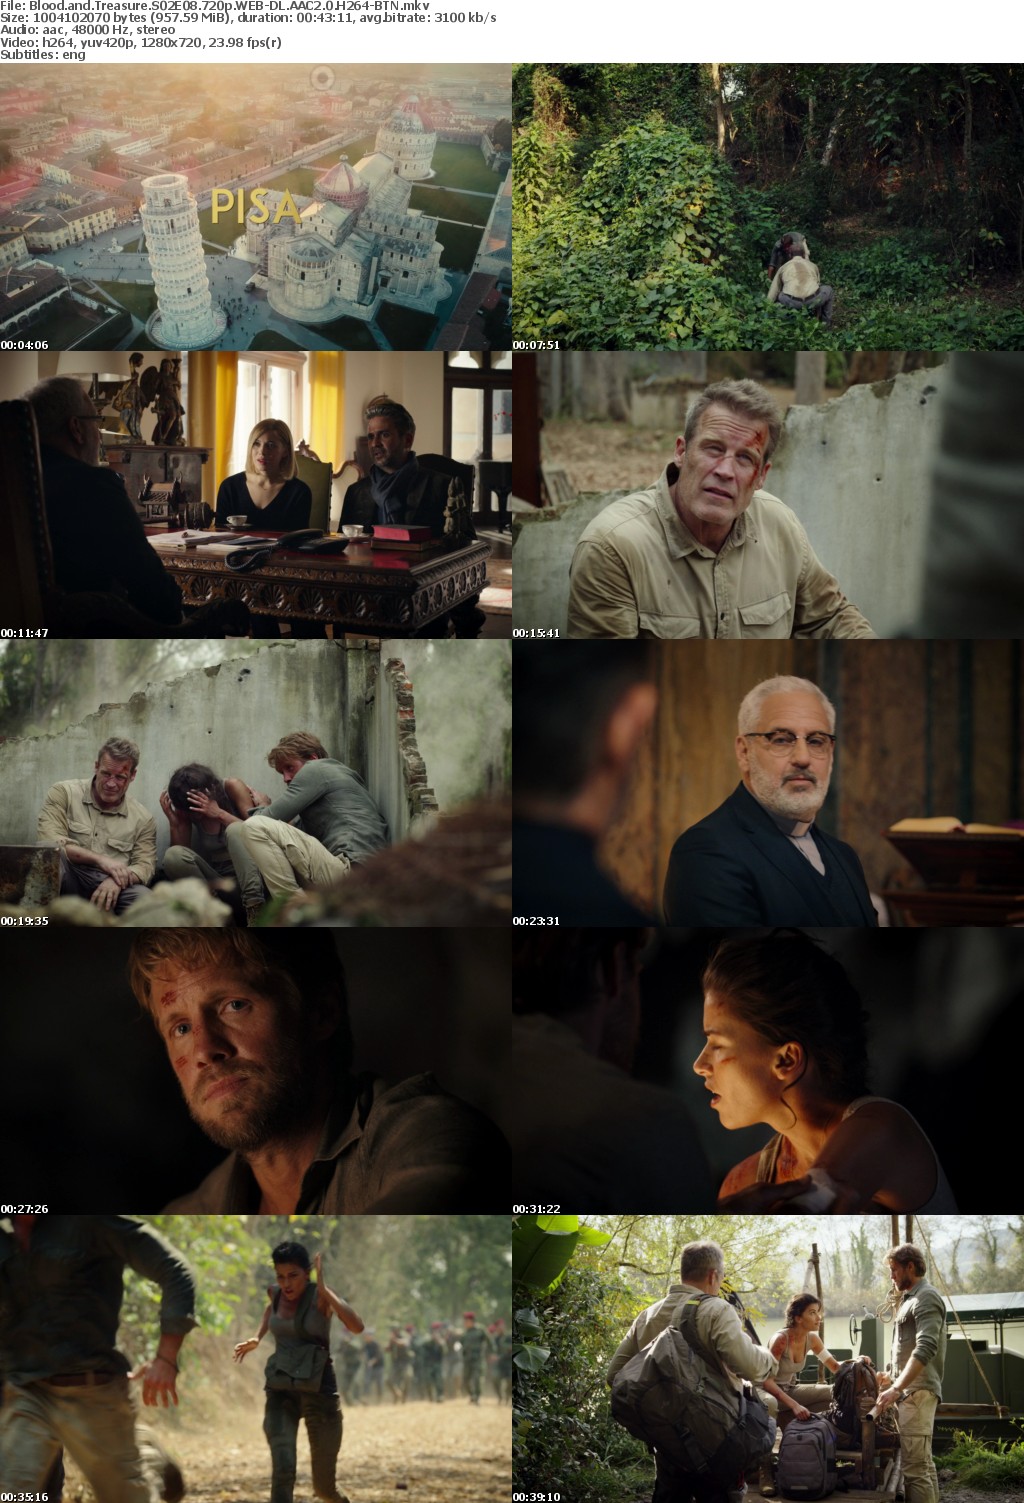 Blood and Treasure S02E08 720p WEB-DL AAC2 0 H264-BTN